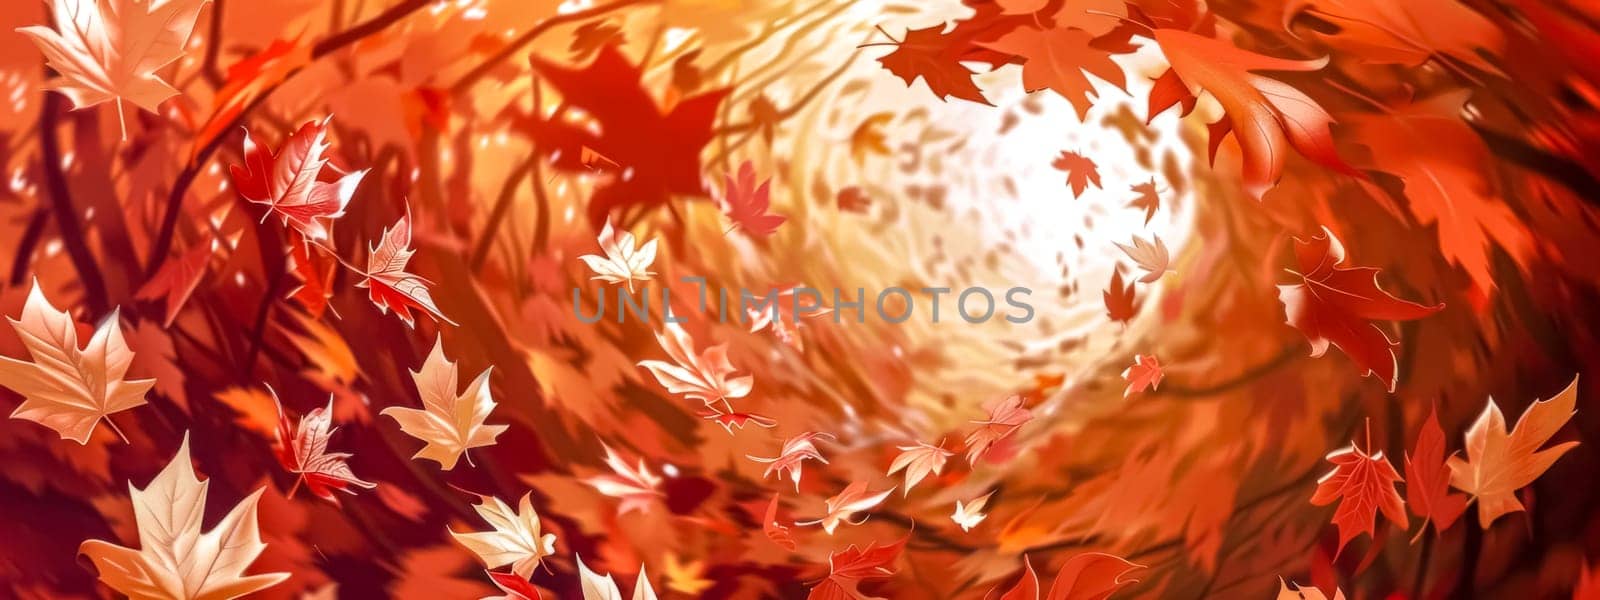 Autumn whirlwind - red leaves in swirling motion by Edophoto